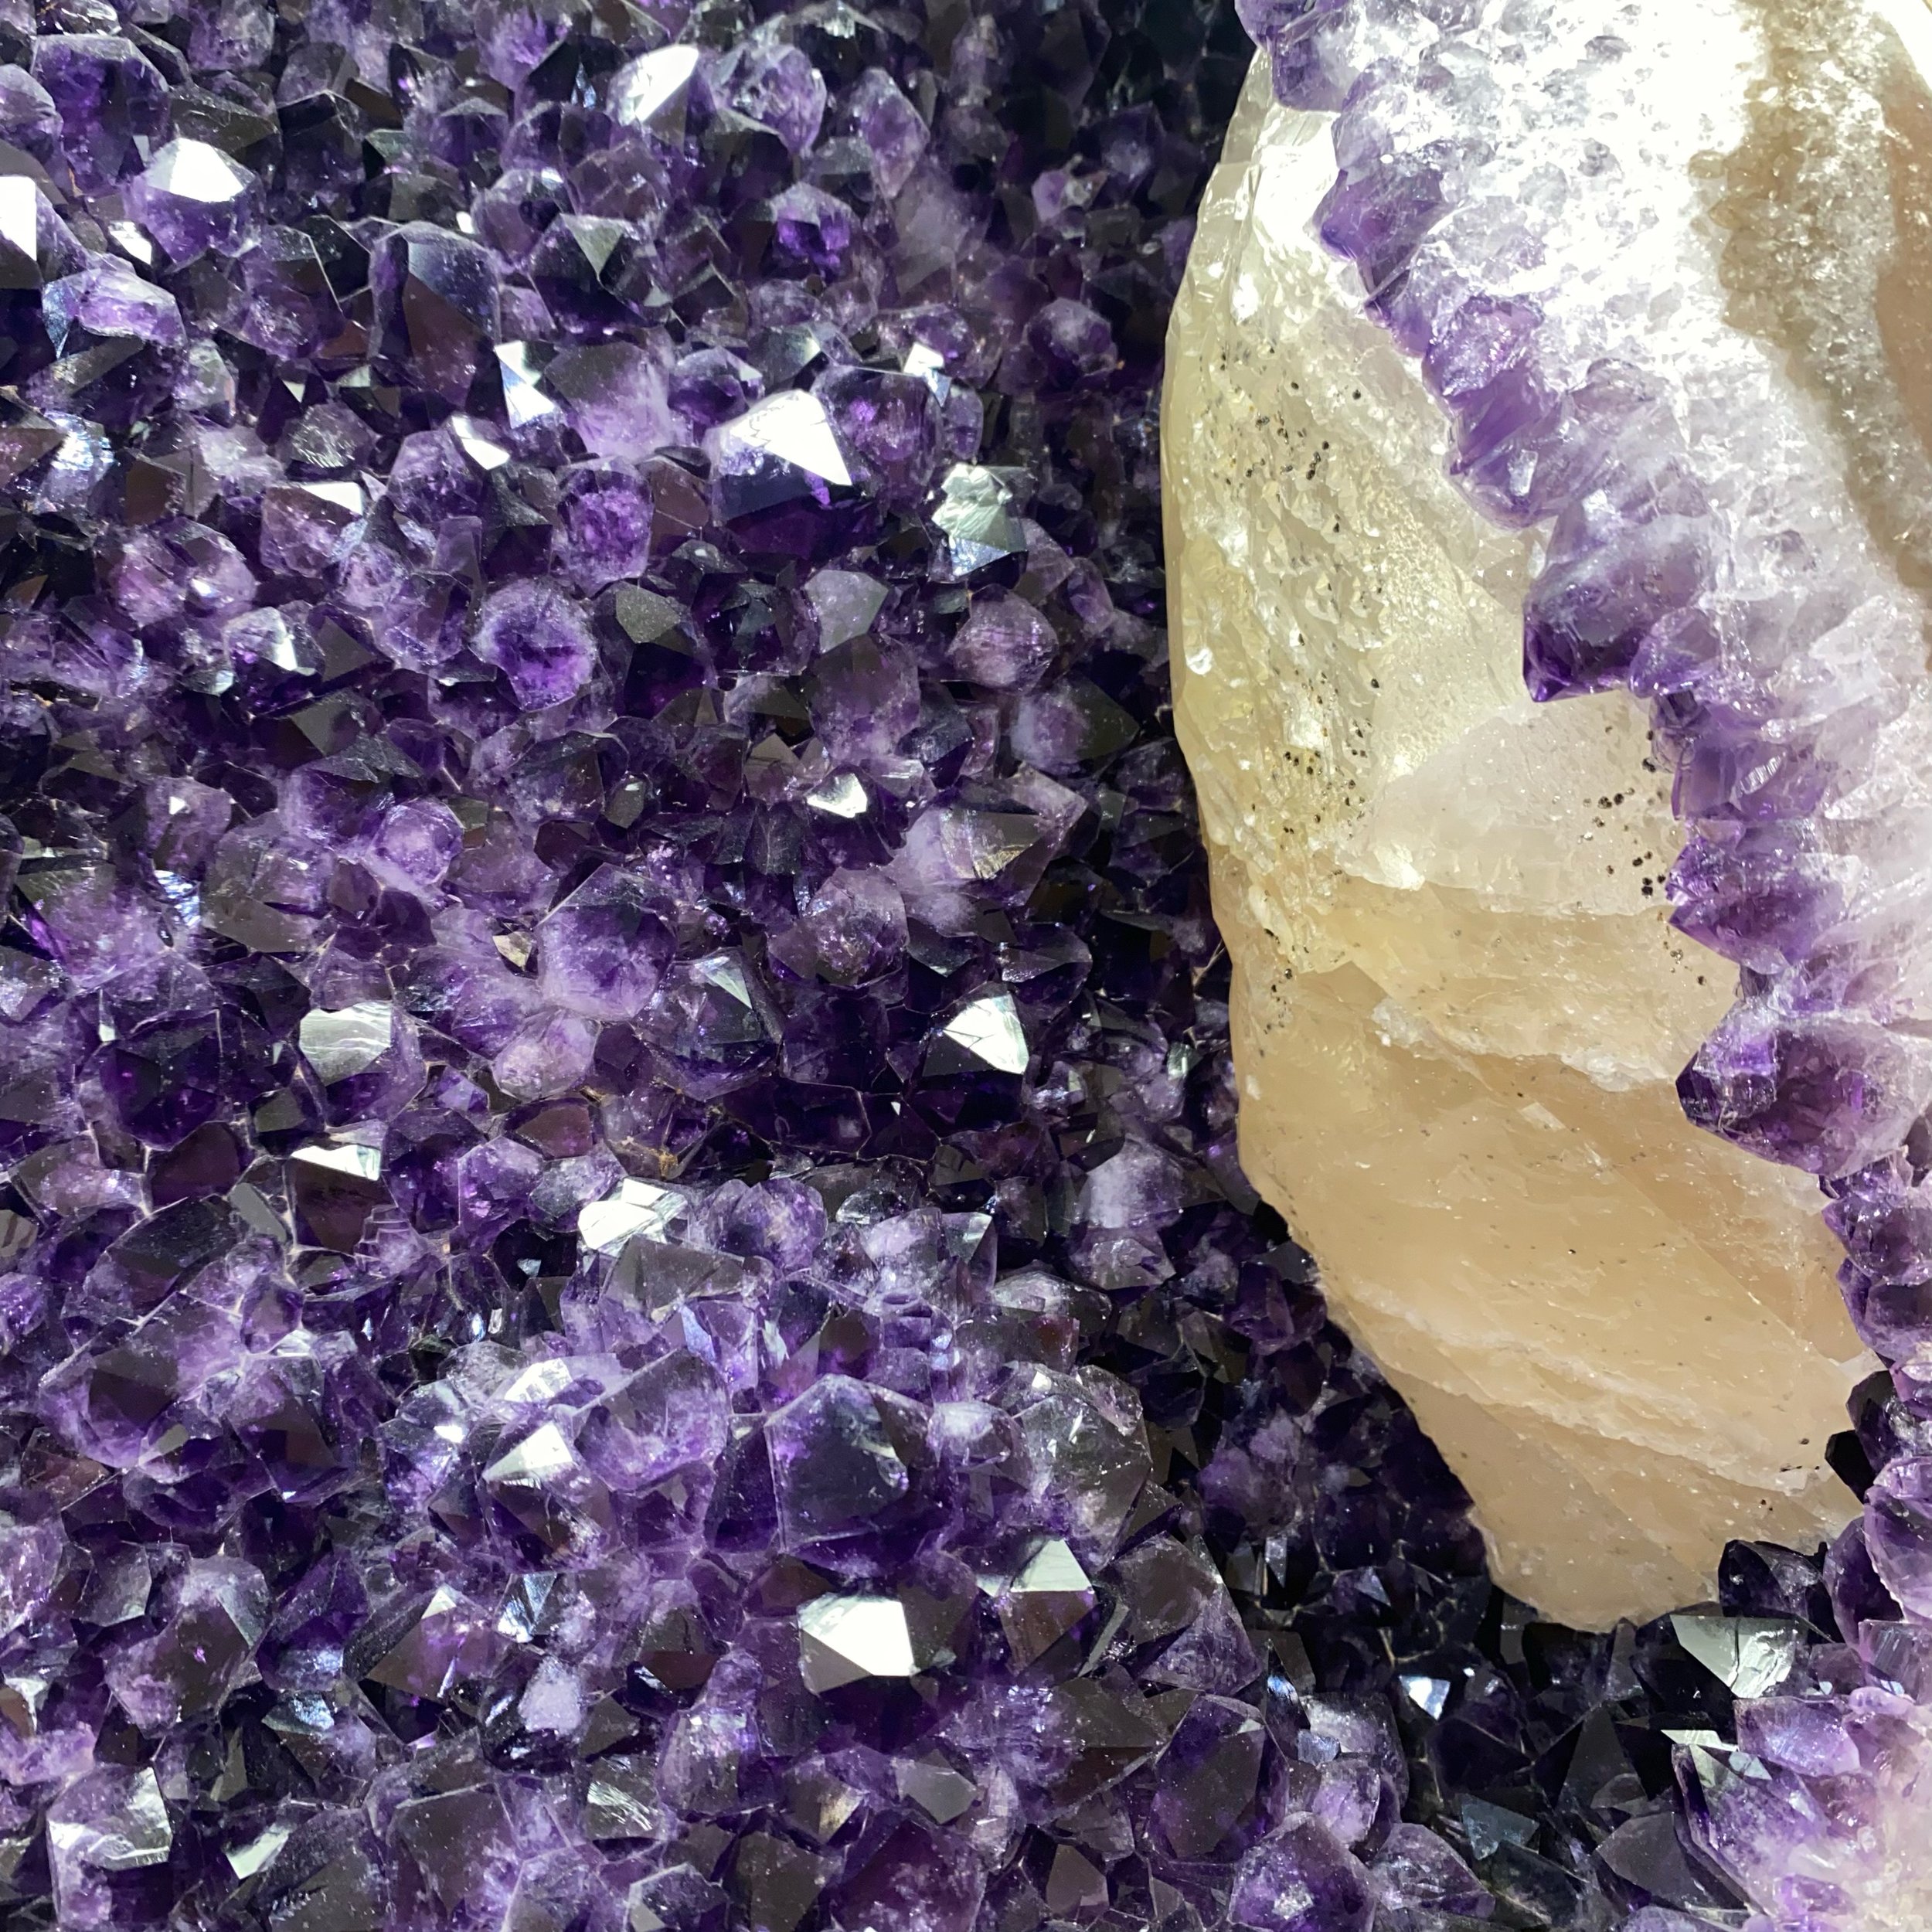 extraordinary-objects-natural-history-rare-amethyst-crystal-with-quartz-node-website-banner.jpg